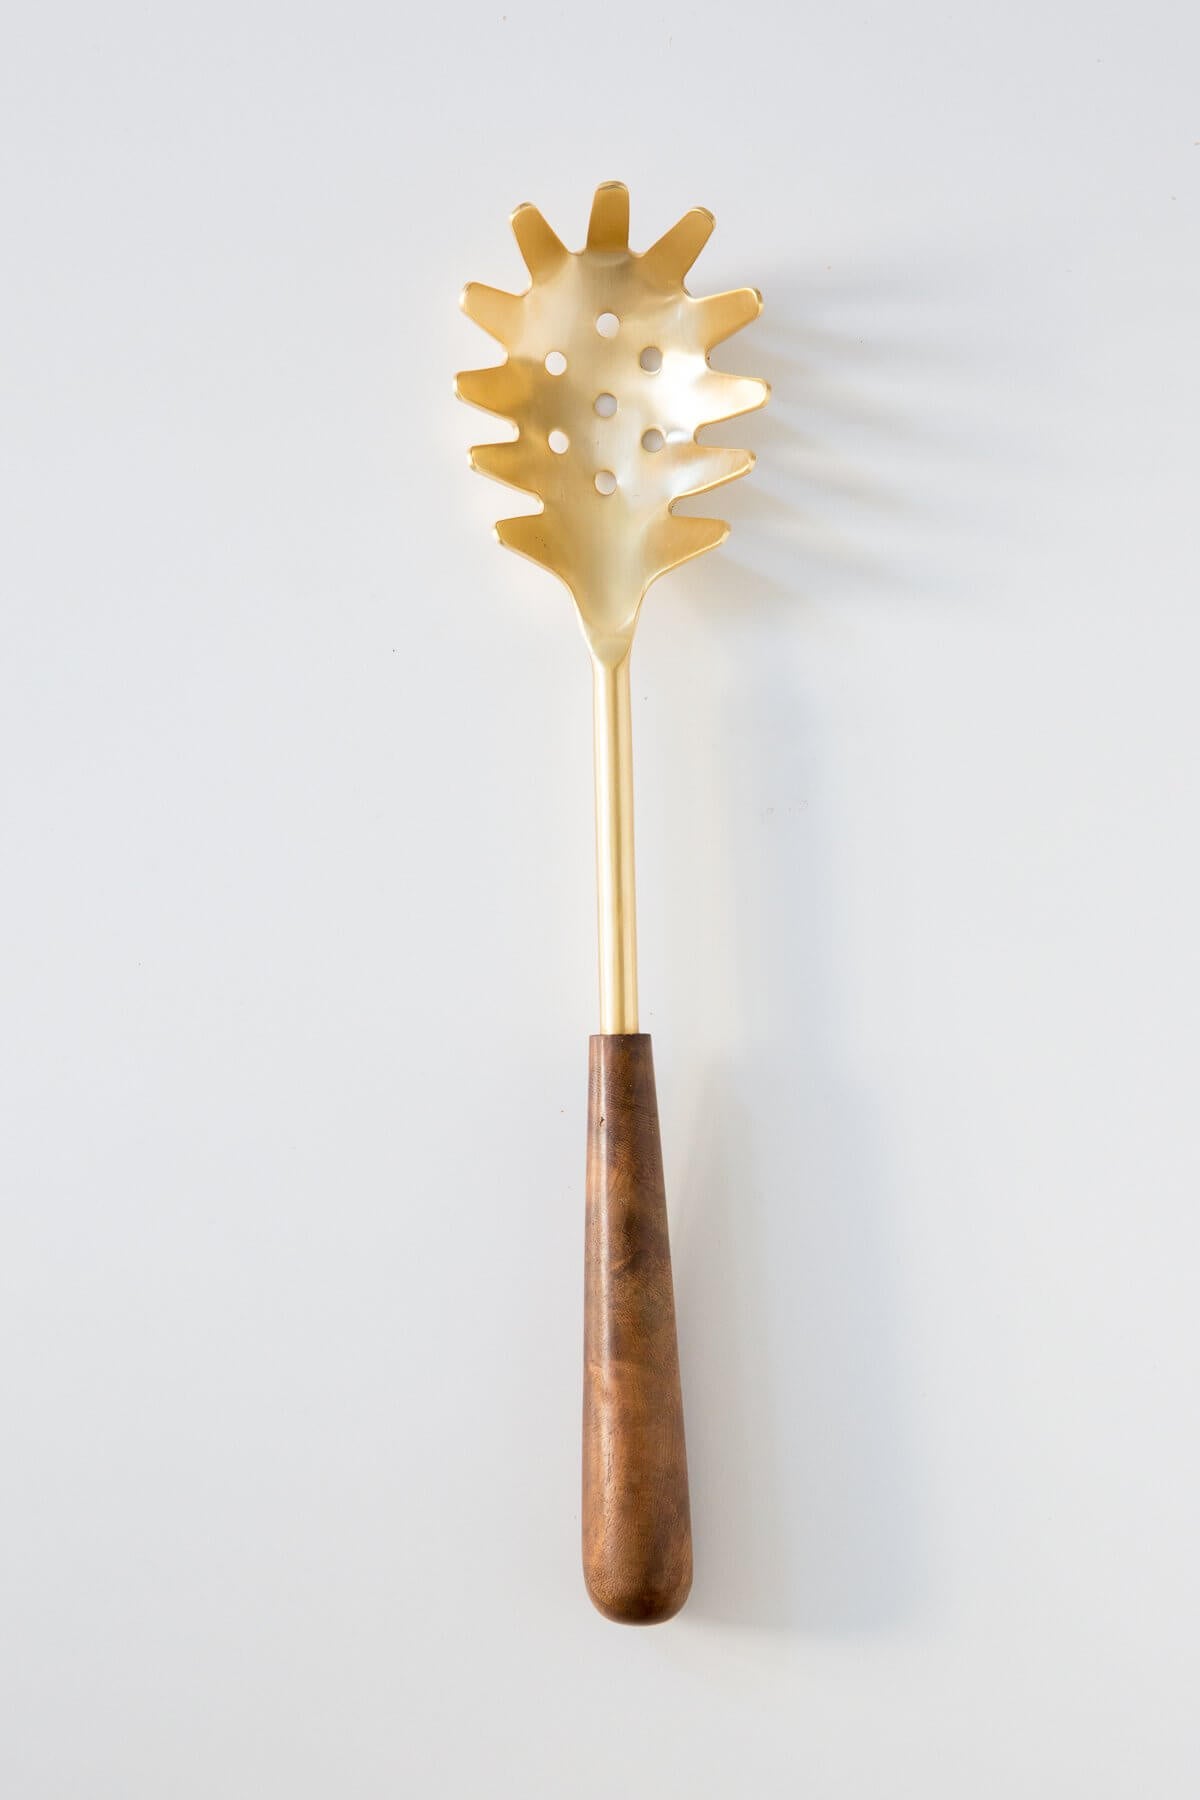 Be Home Gold + Wood Pasta Server